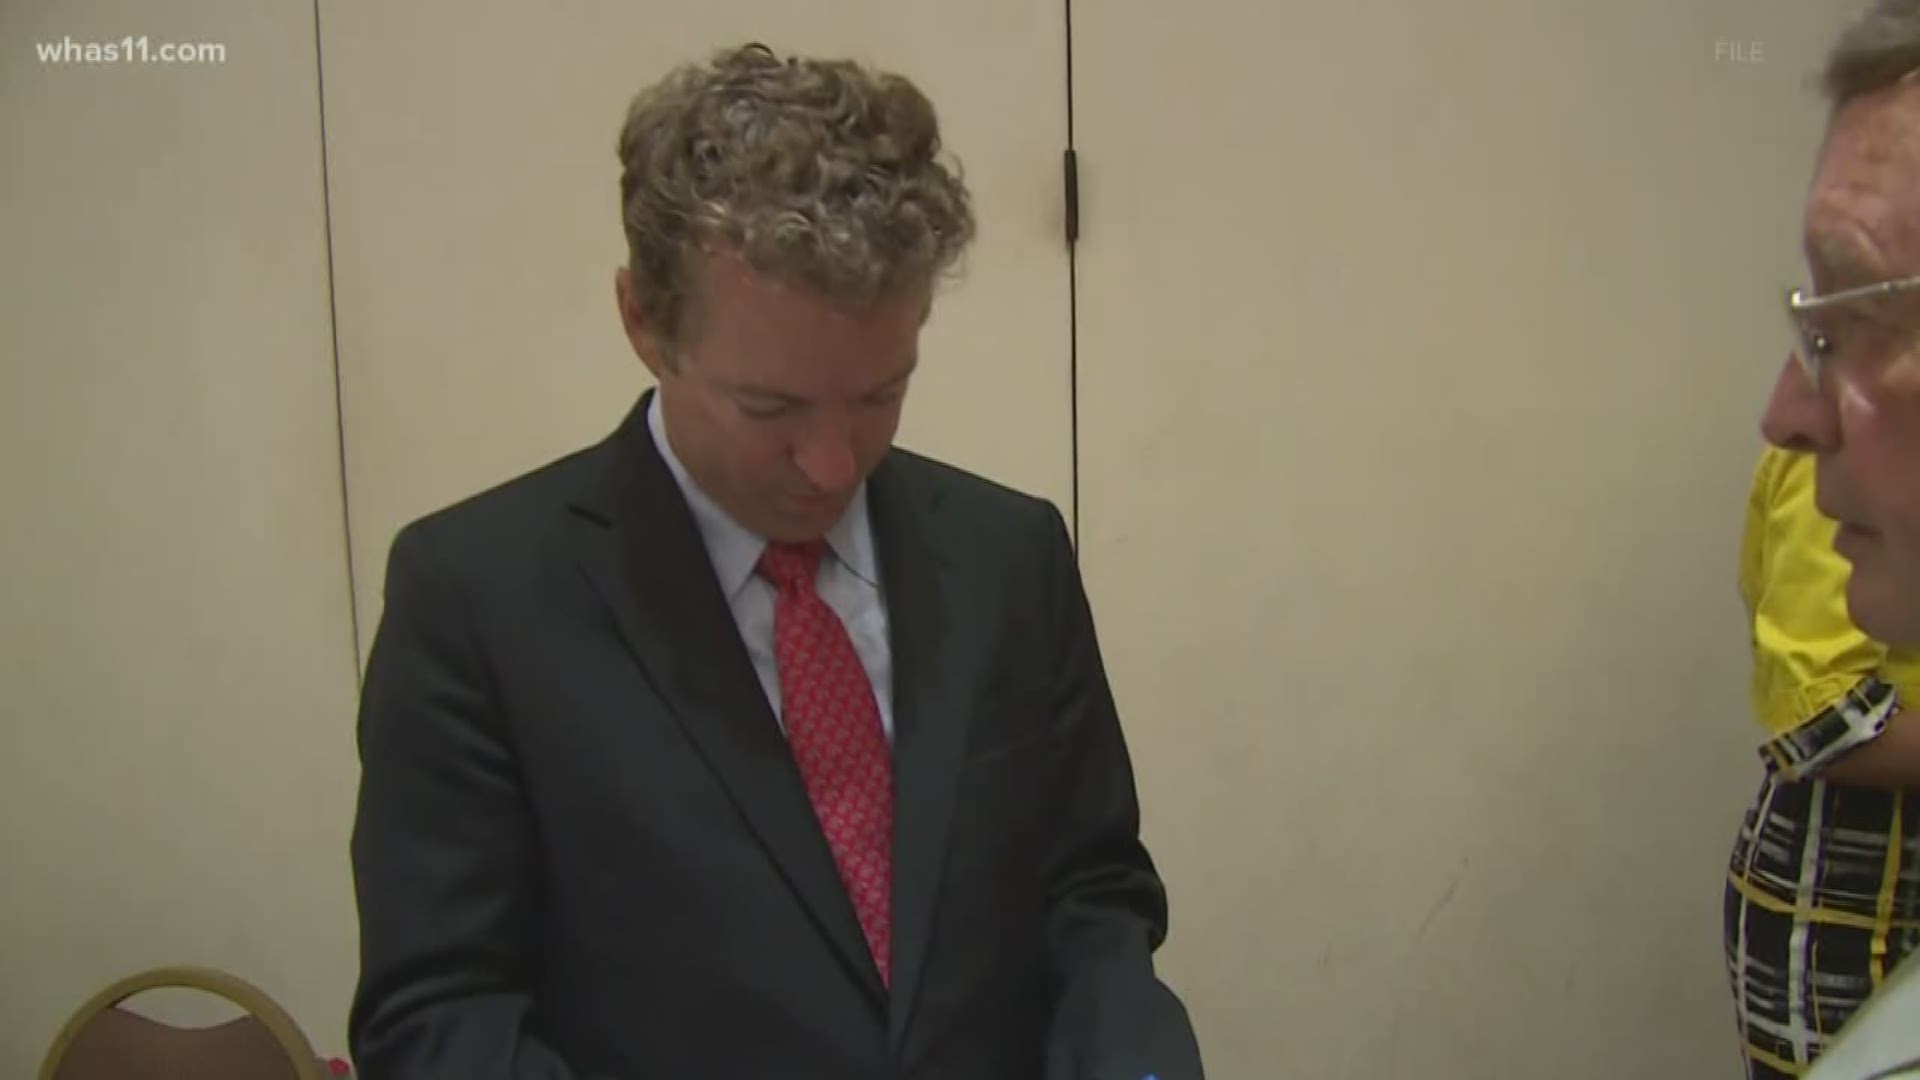 Kentucky Senator Rand Paul is defending himself after coming under criticism for not quarantining himself after he was tested for the coronavirus.